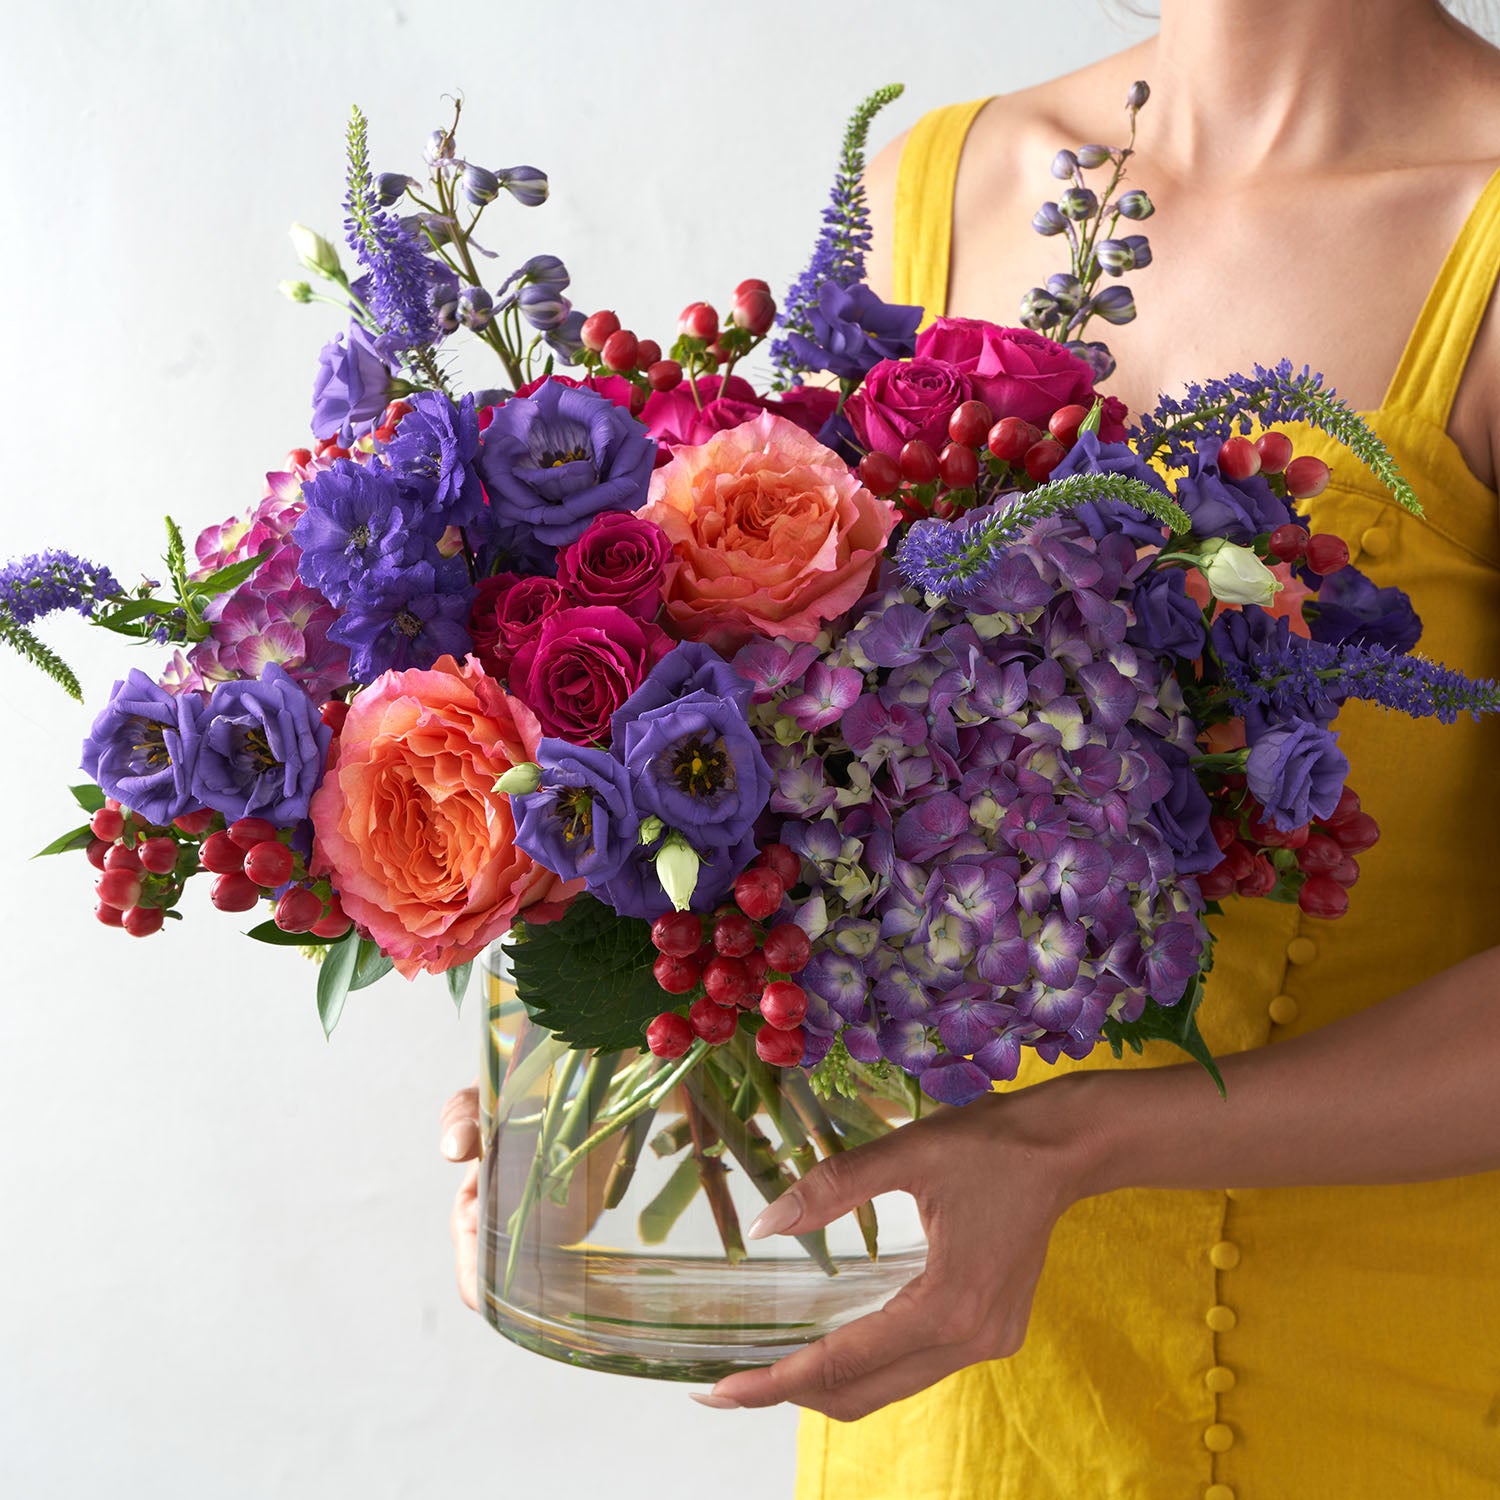 Woman in yellow dress holding glas vase filled with deep purple, orange, and fuchsia flowers.